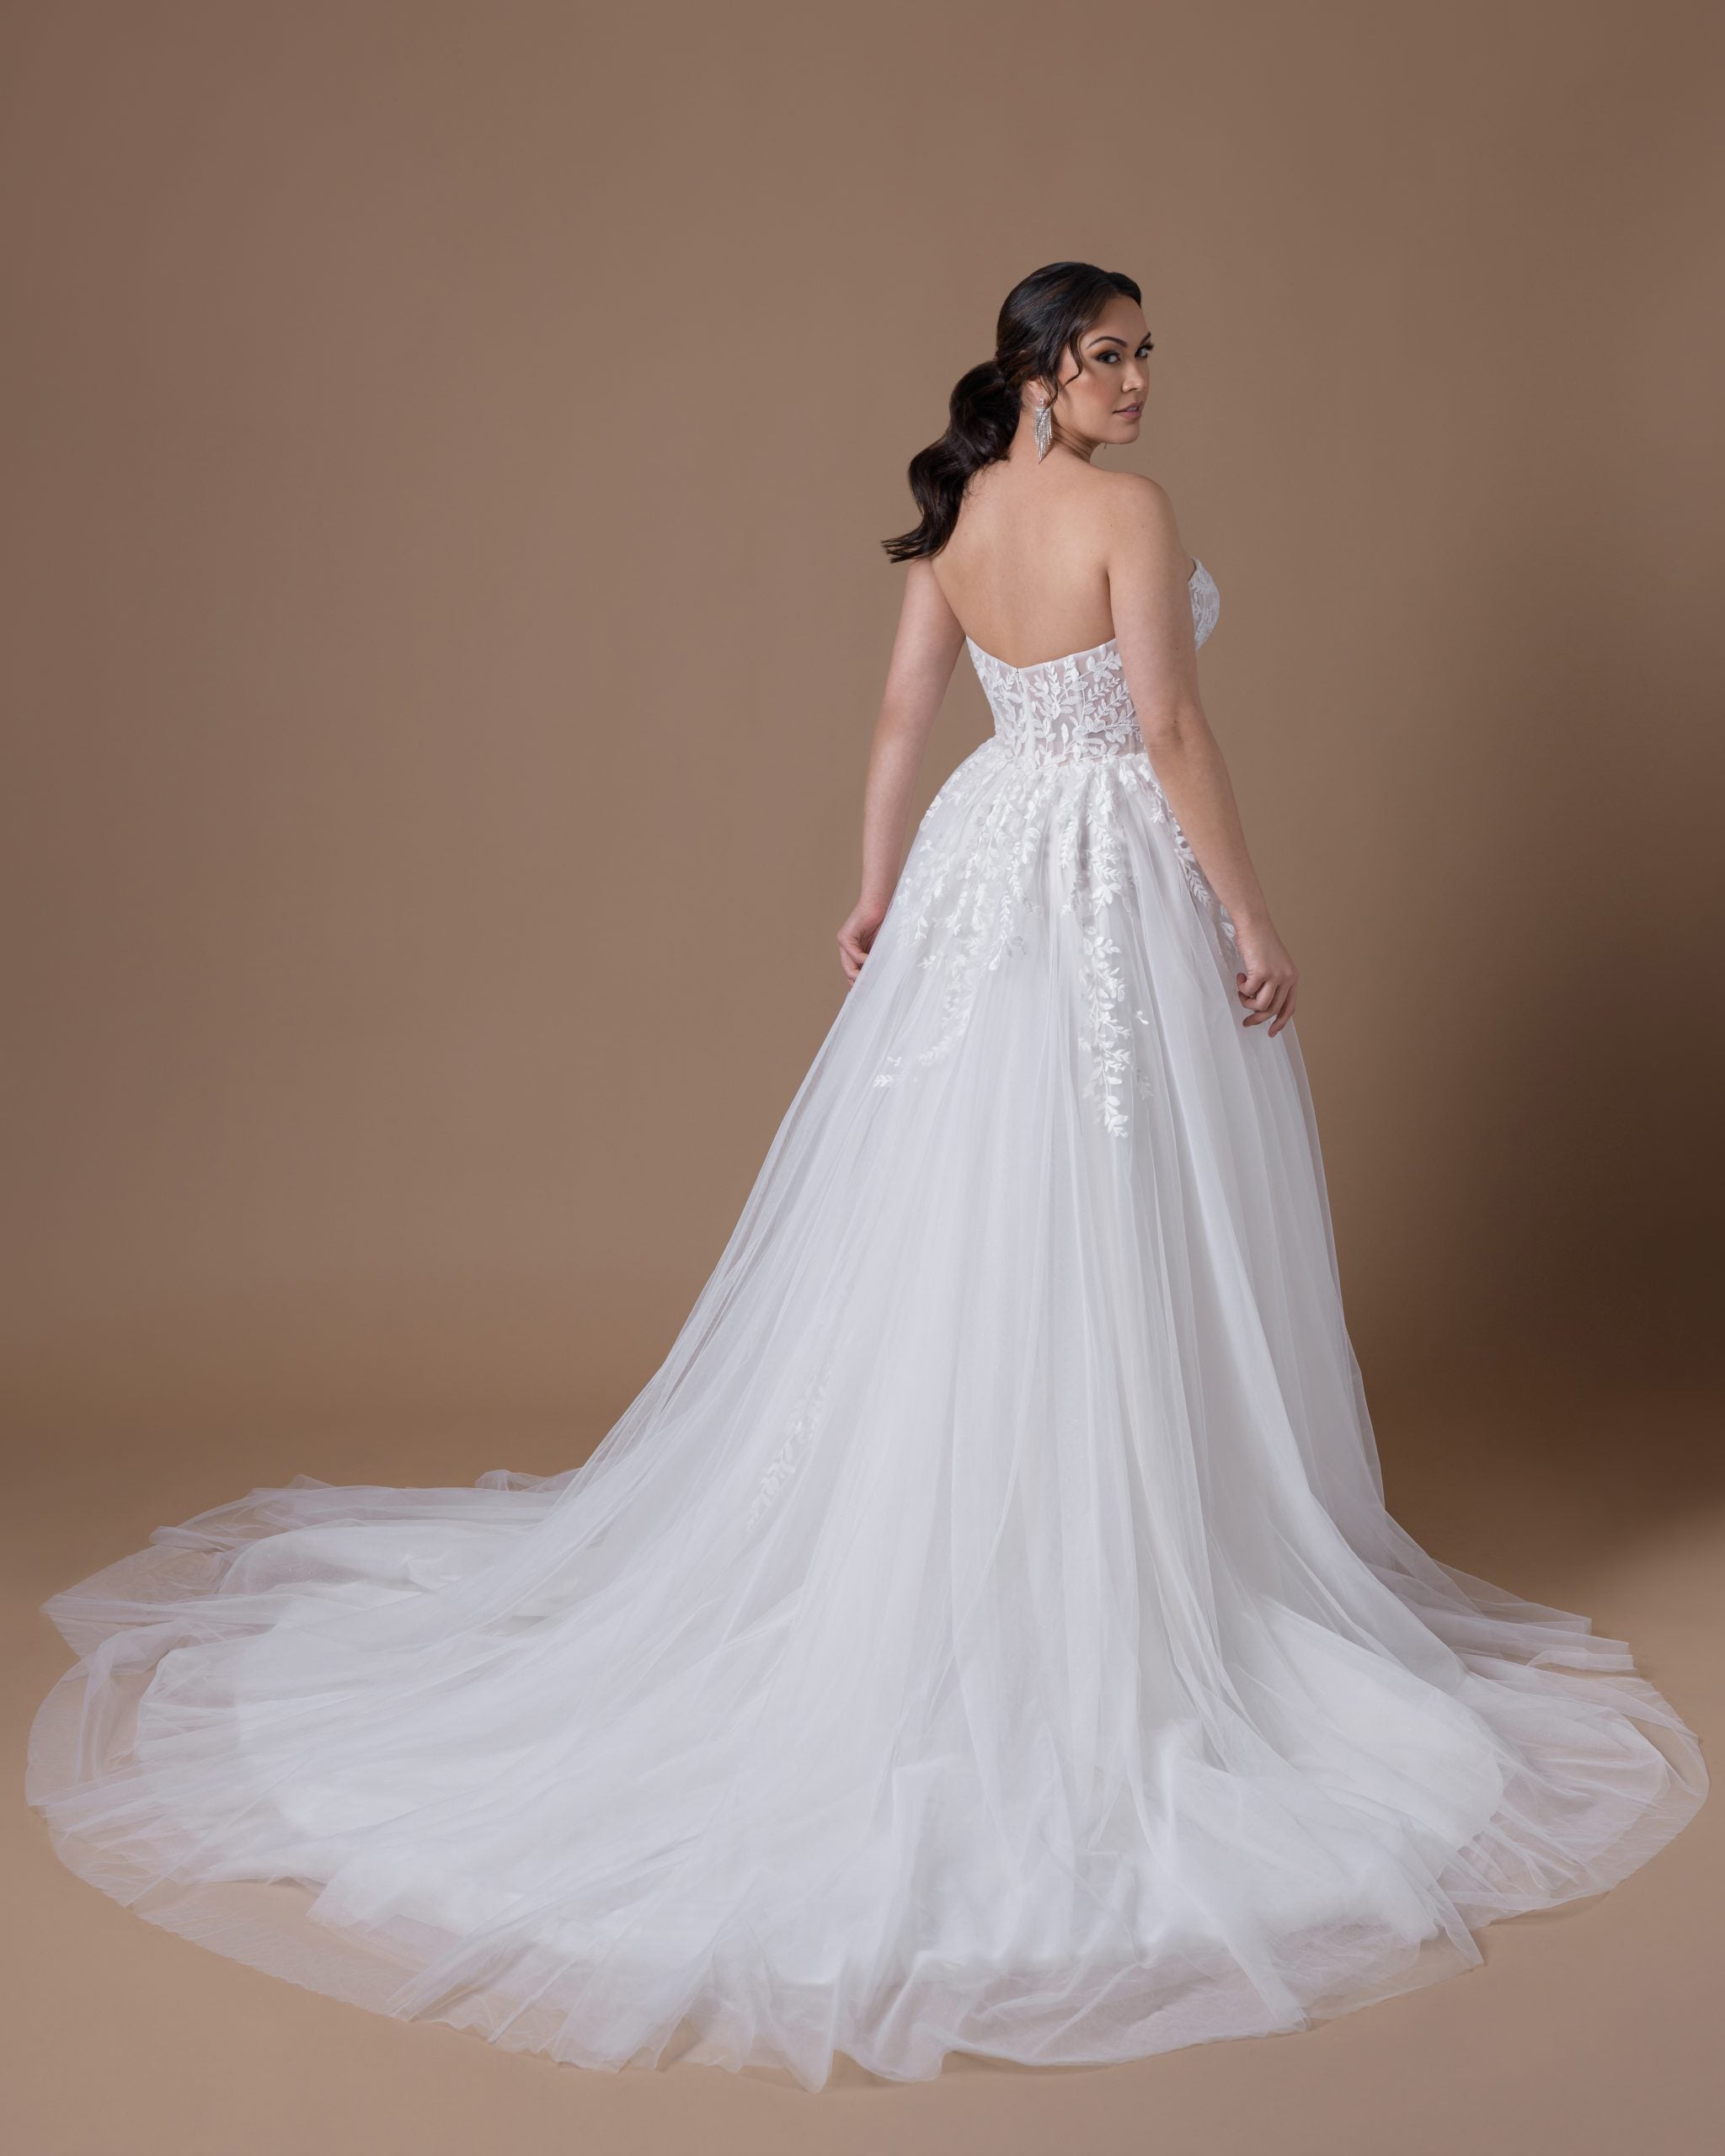 Romantic Strapless Tulle A-line Gown by Dany Girl - Image 2